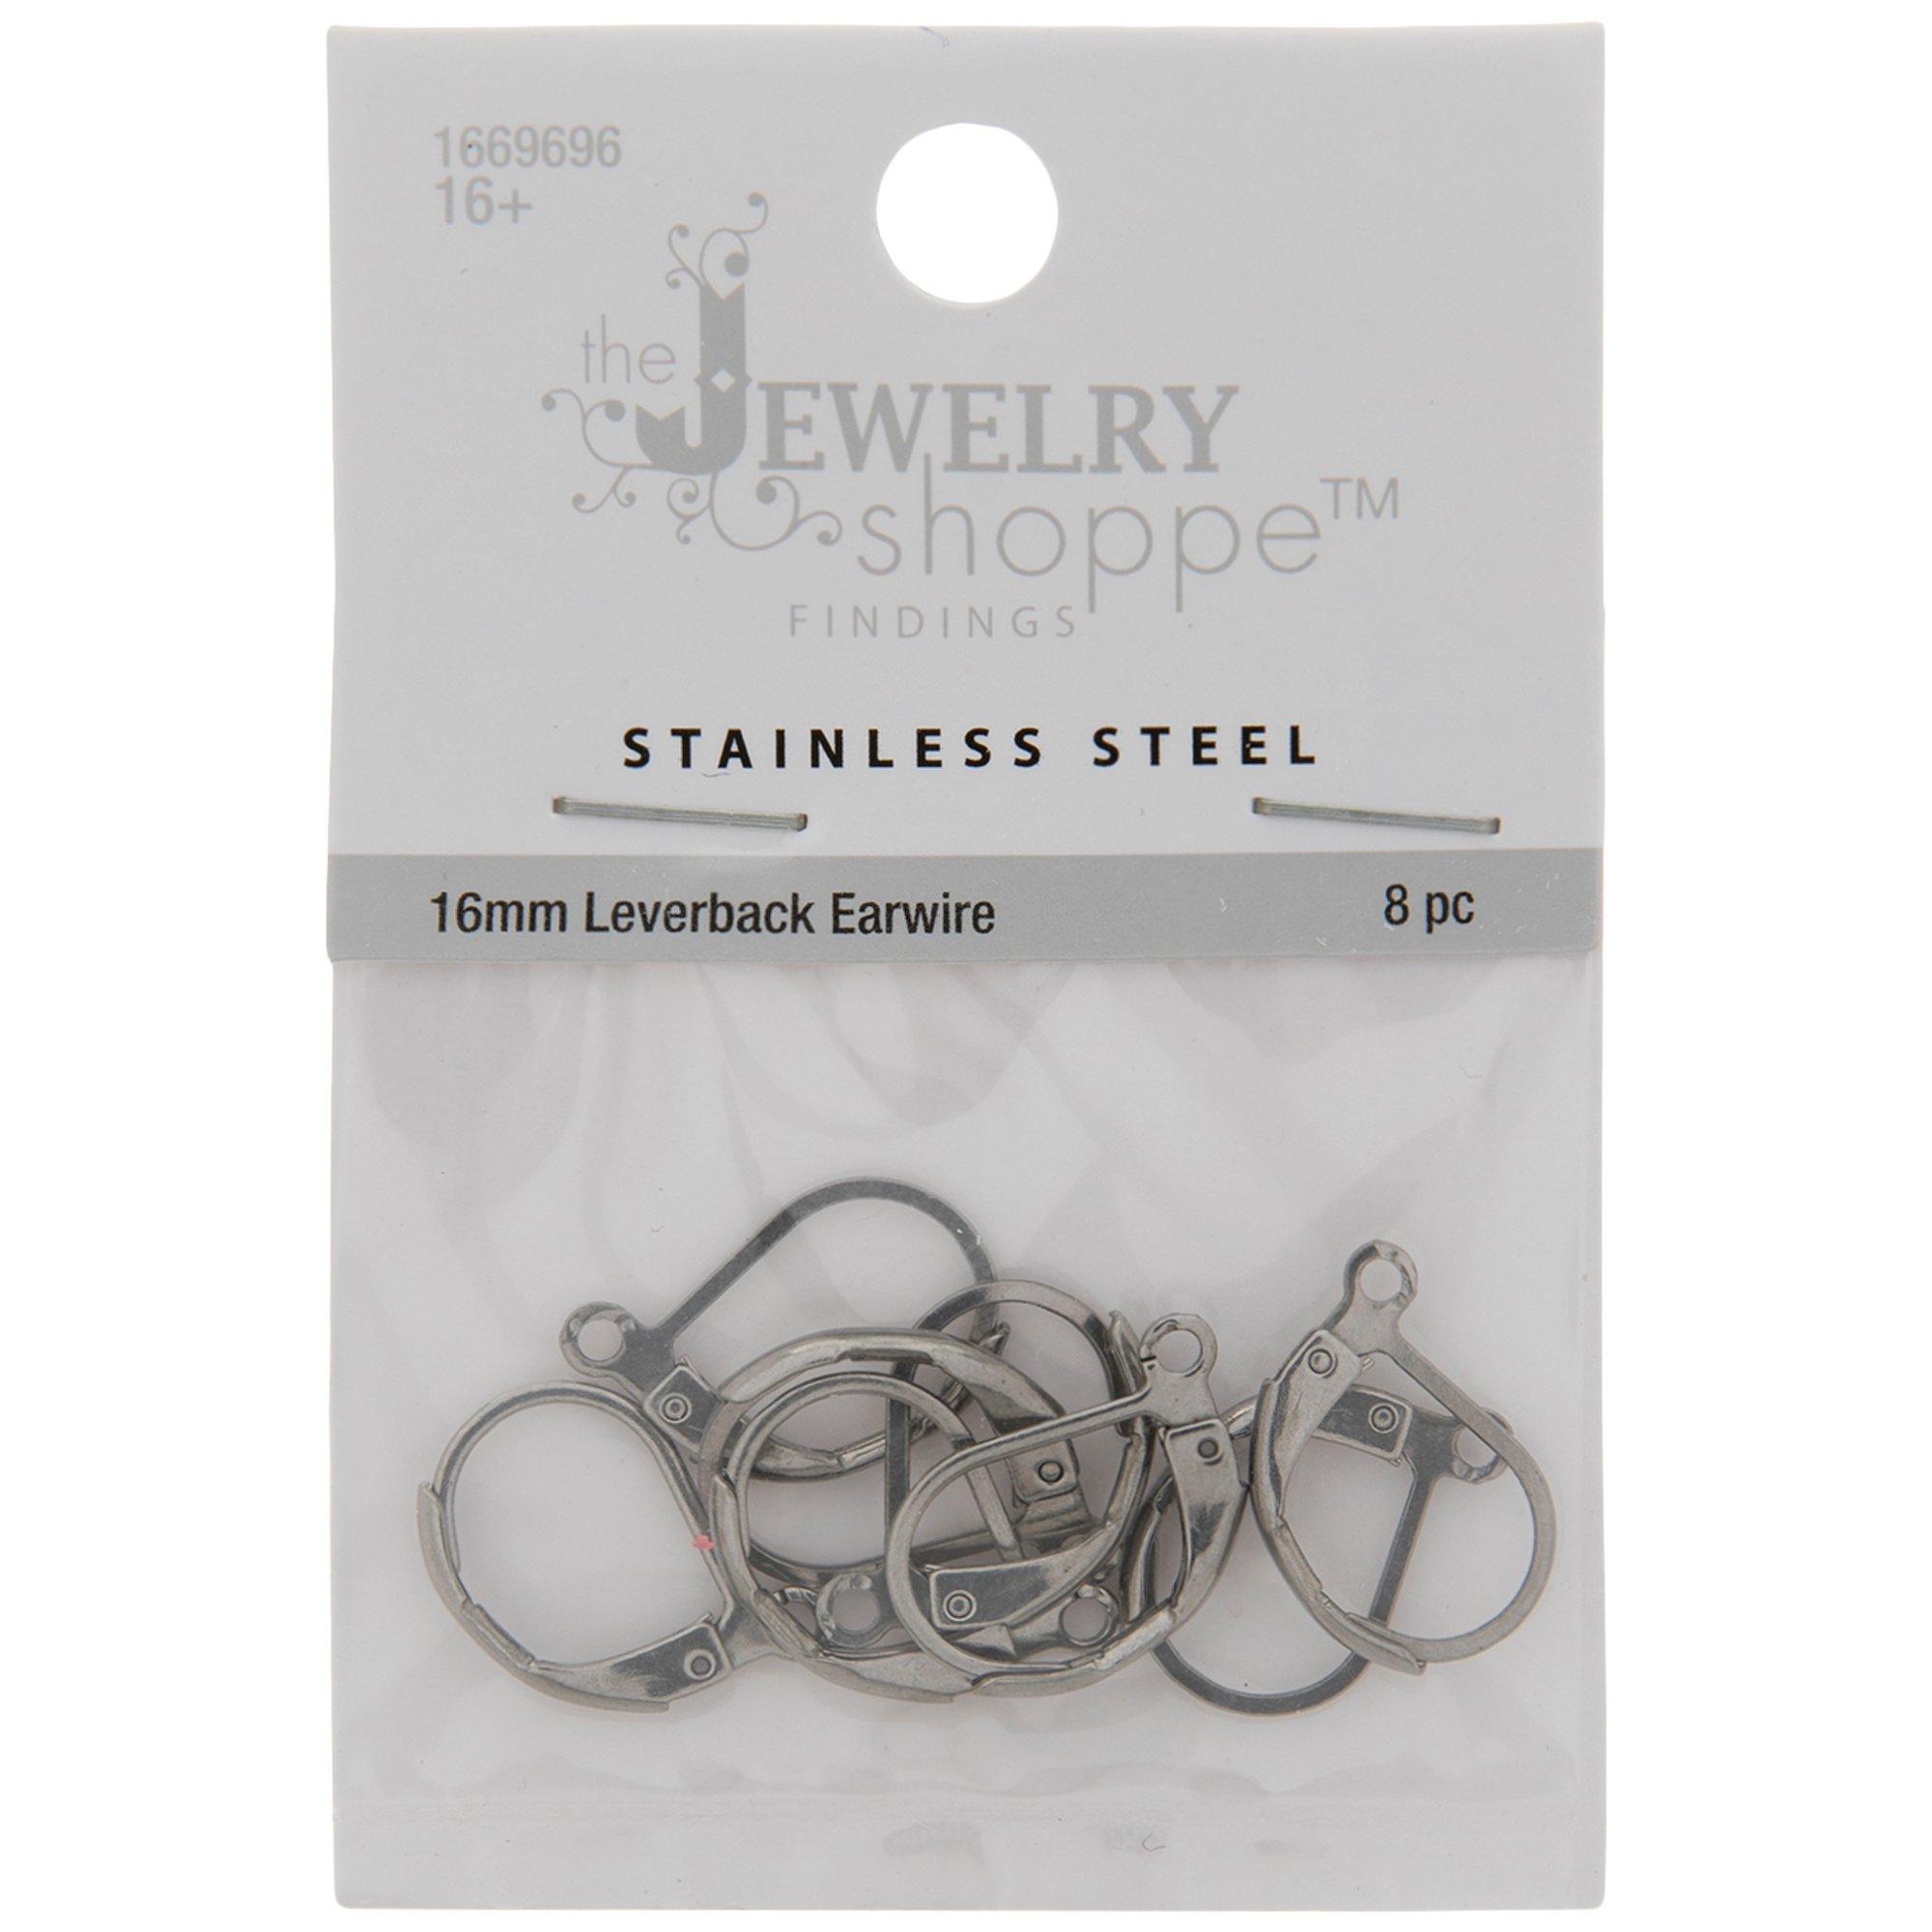 1 Box 80pcs Leverback Earring Hooks Real Plated Stainless Steel Hoop Round  Lever Back Ear Wires Lever Back Hoops For Jewelry Making Earrings Backs F